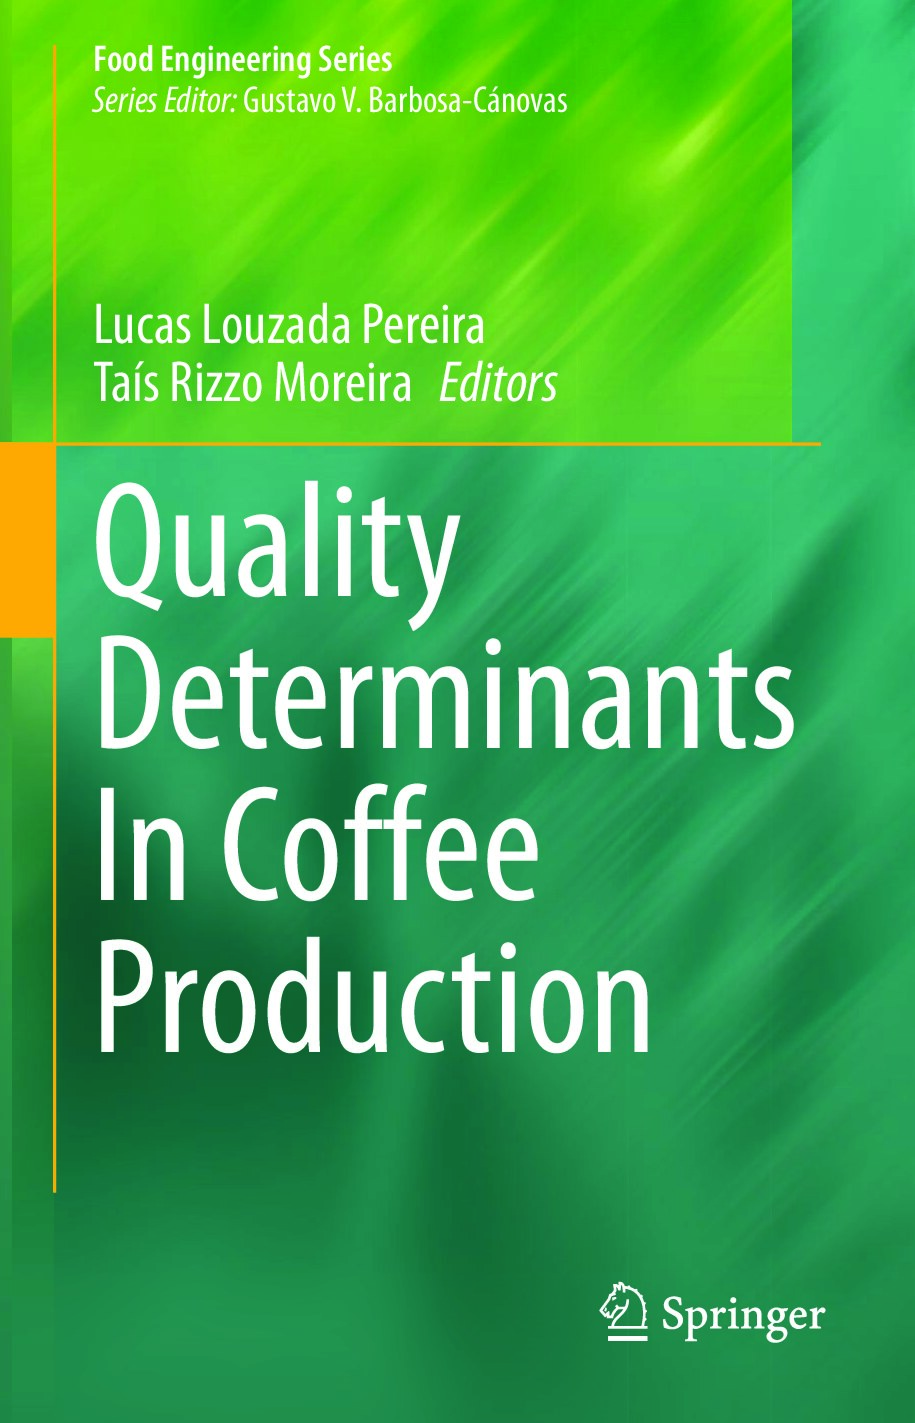 Quality Determinants In Coffee Production-Springer (2022)